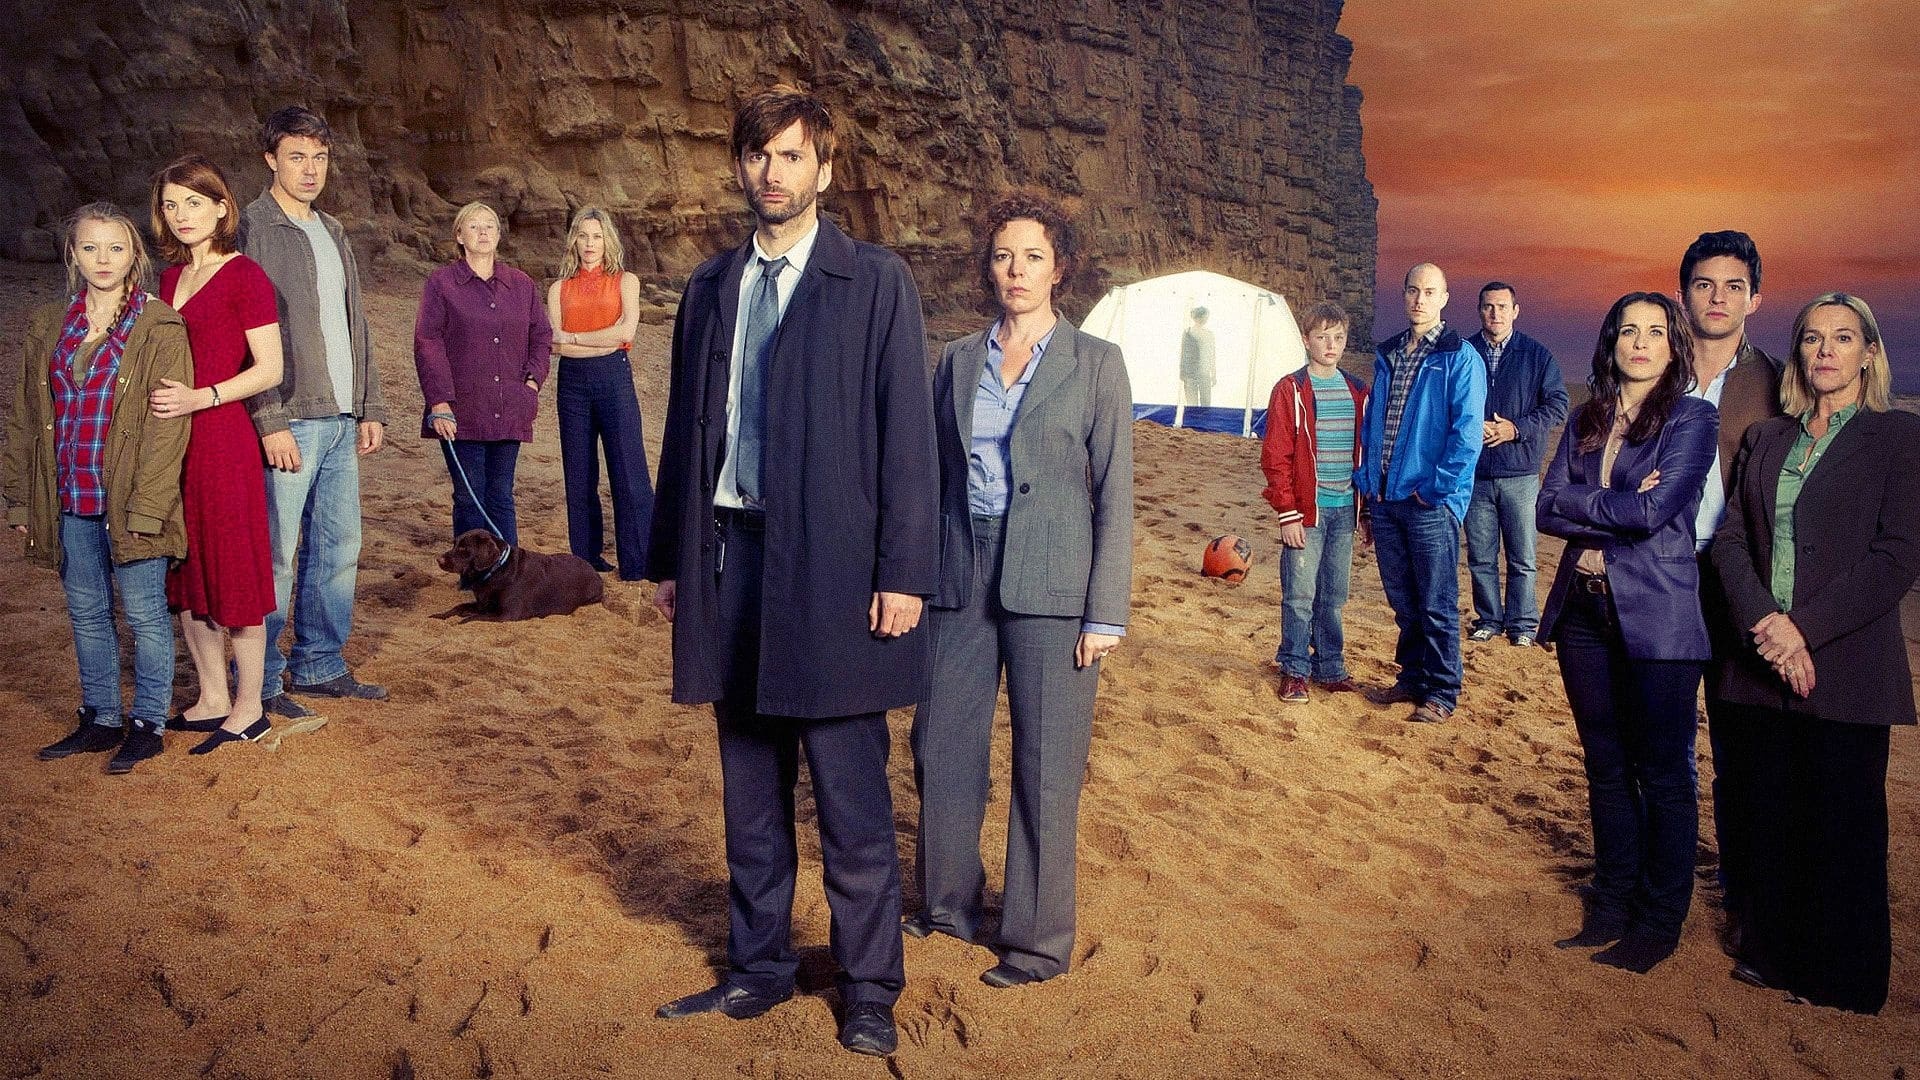 Broadchurch, Evocative atmosphere, Compelling mysteries, Deeply human stories, 1920x1080 Full HD Desktop